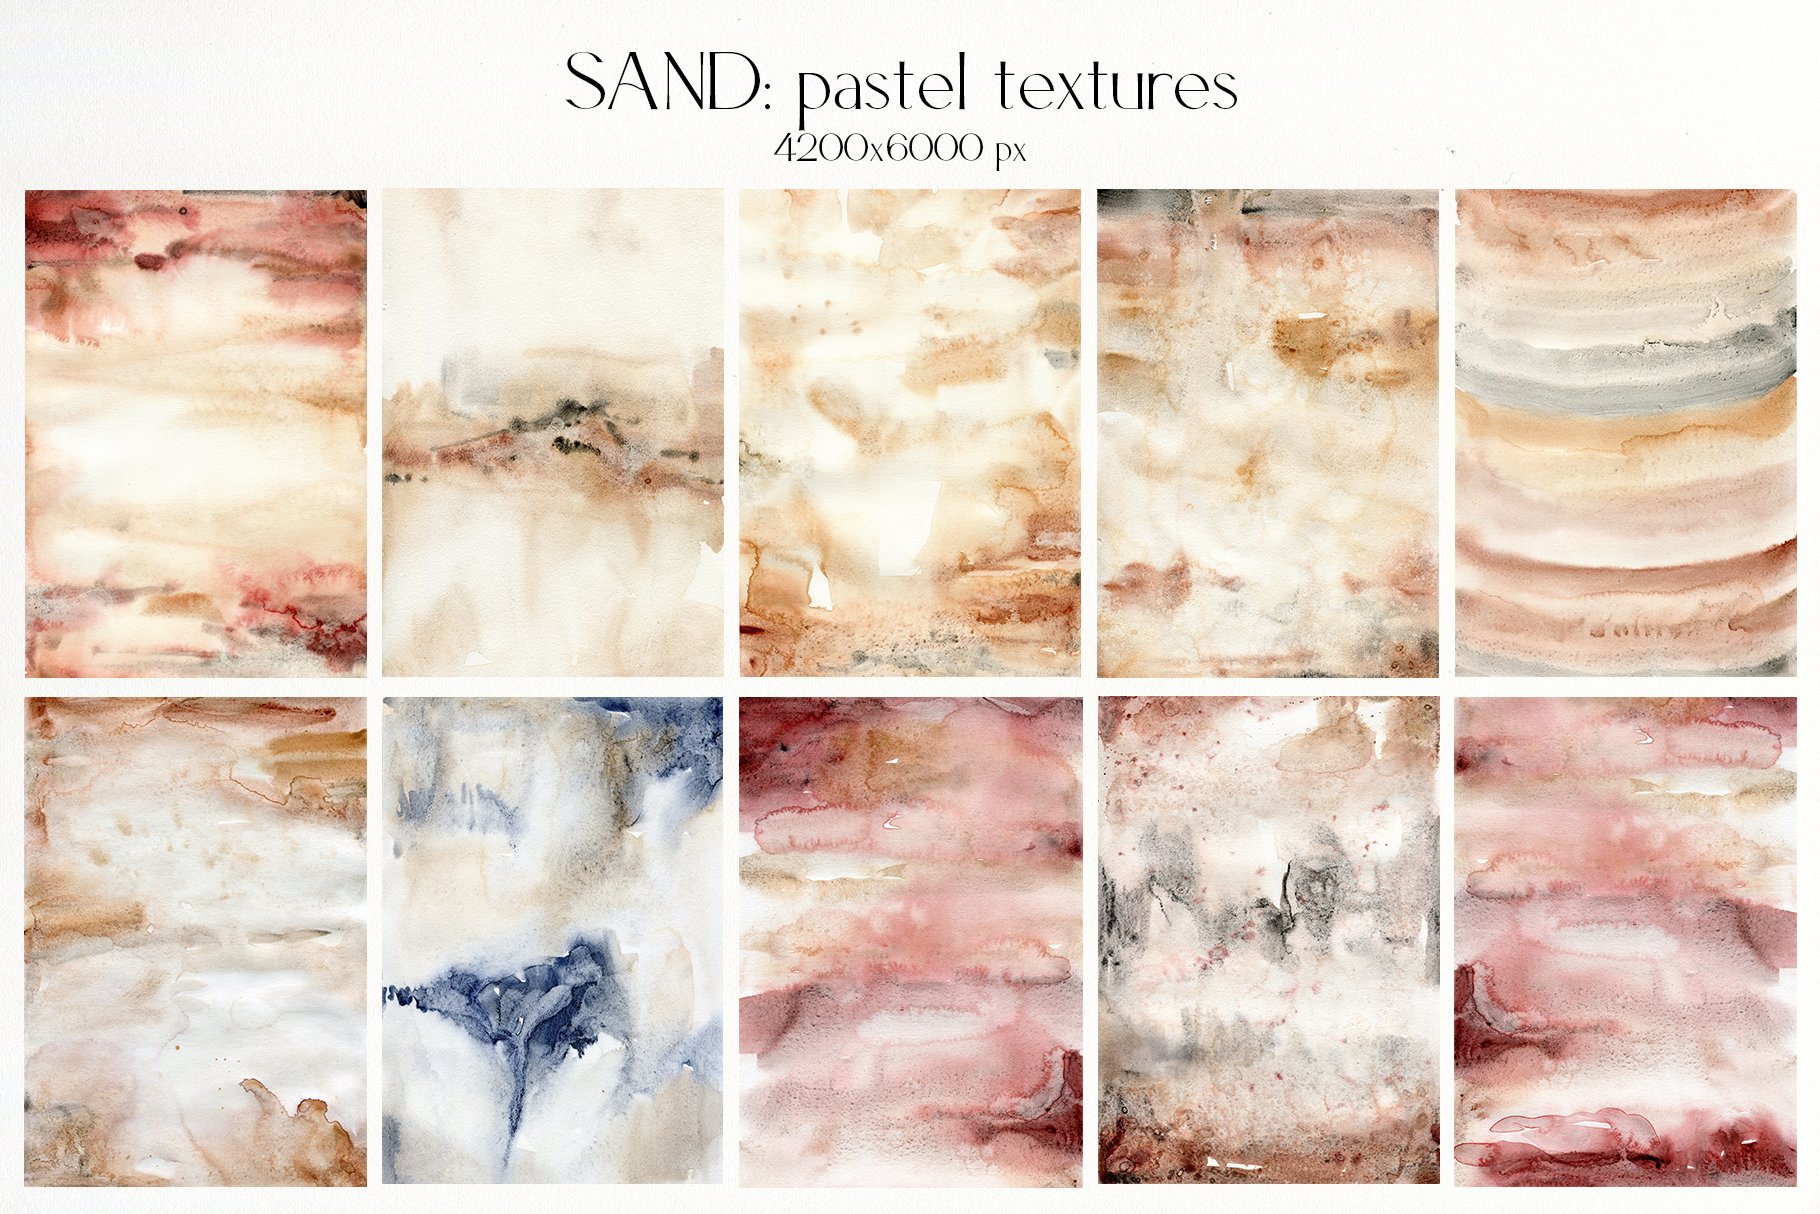 Sand Neutral Watercolor Abstract Textures